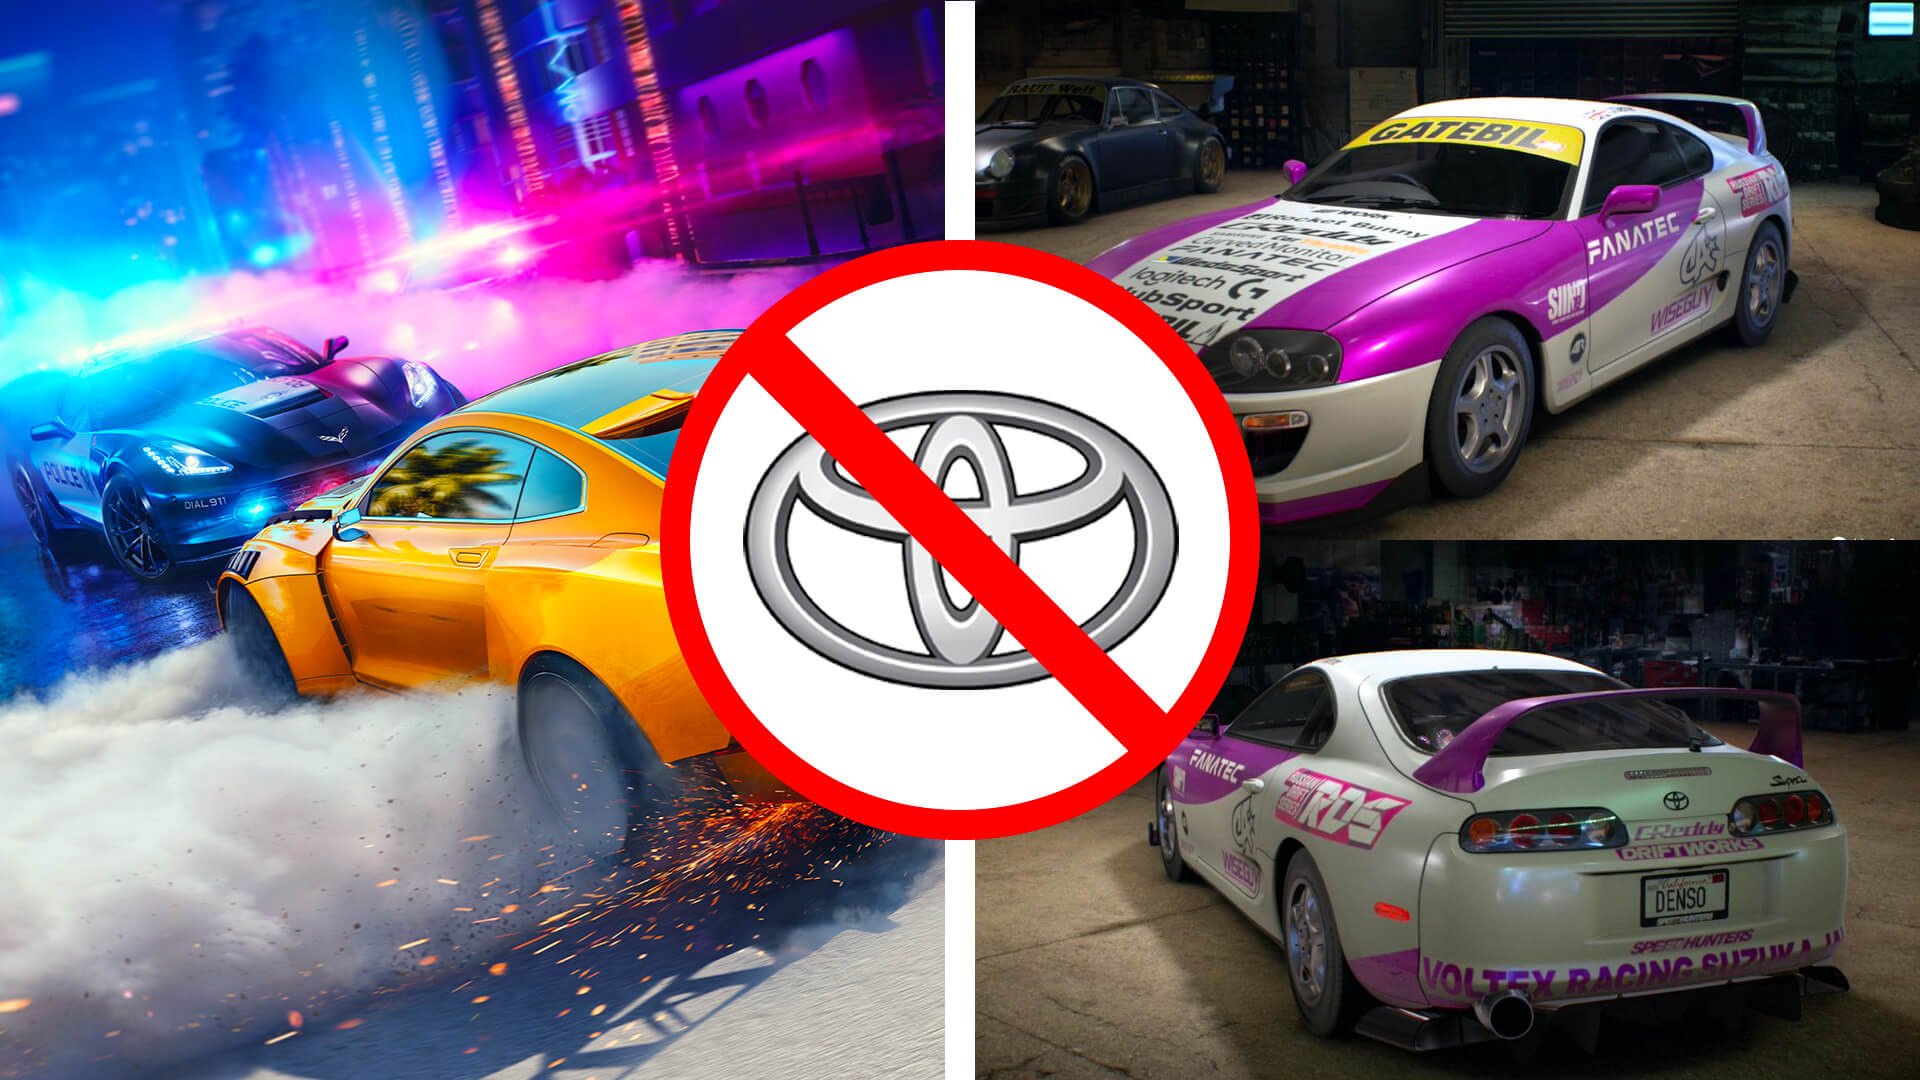 Toyota Doesnt Want Its Cars In Games With Illegal Street